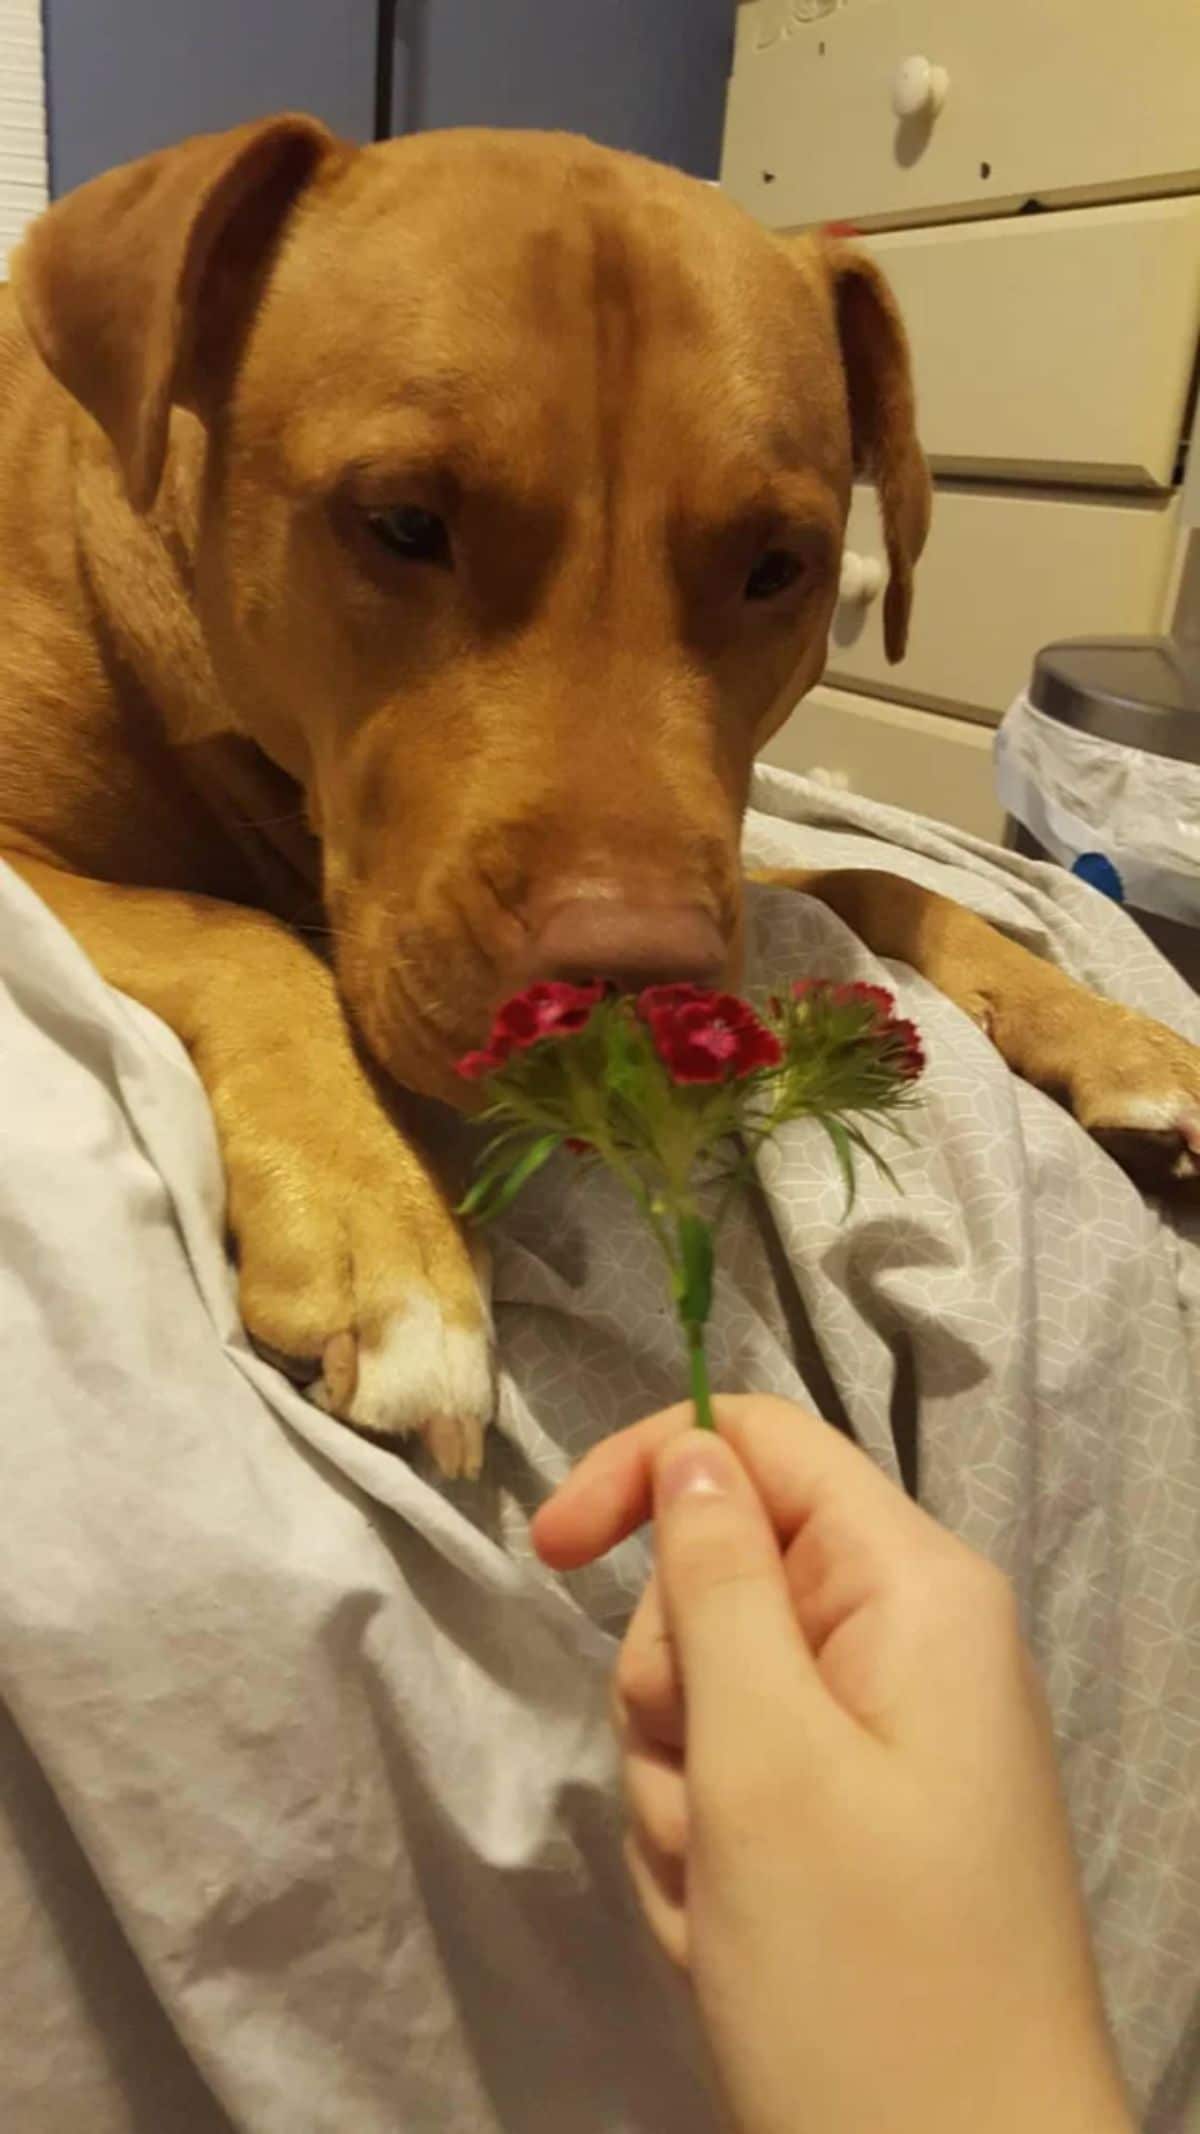 someone holding up red flowers to a brown dog on a bed